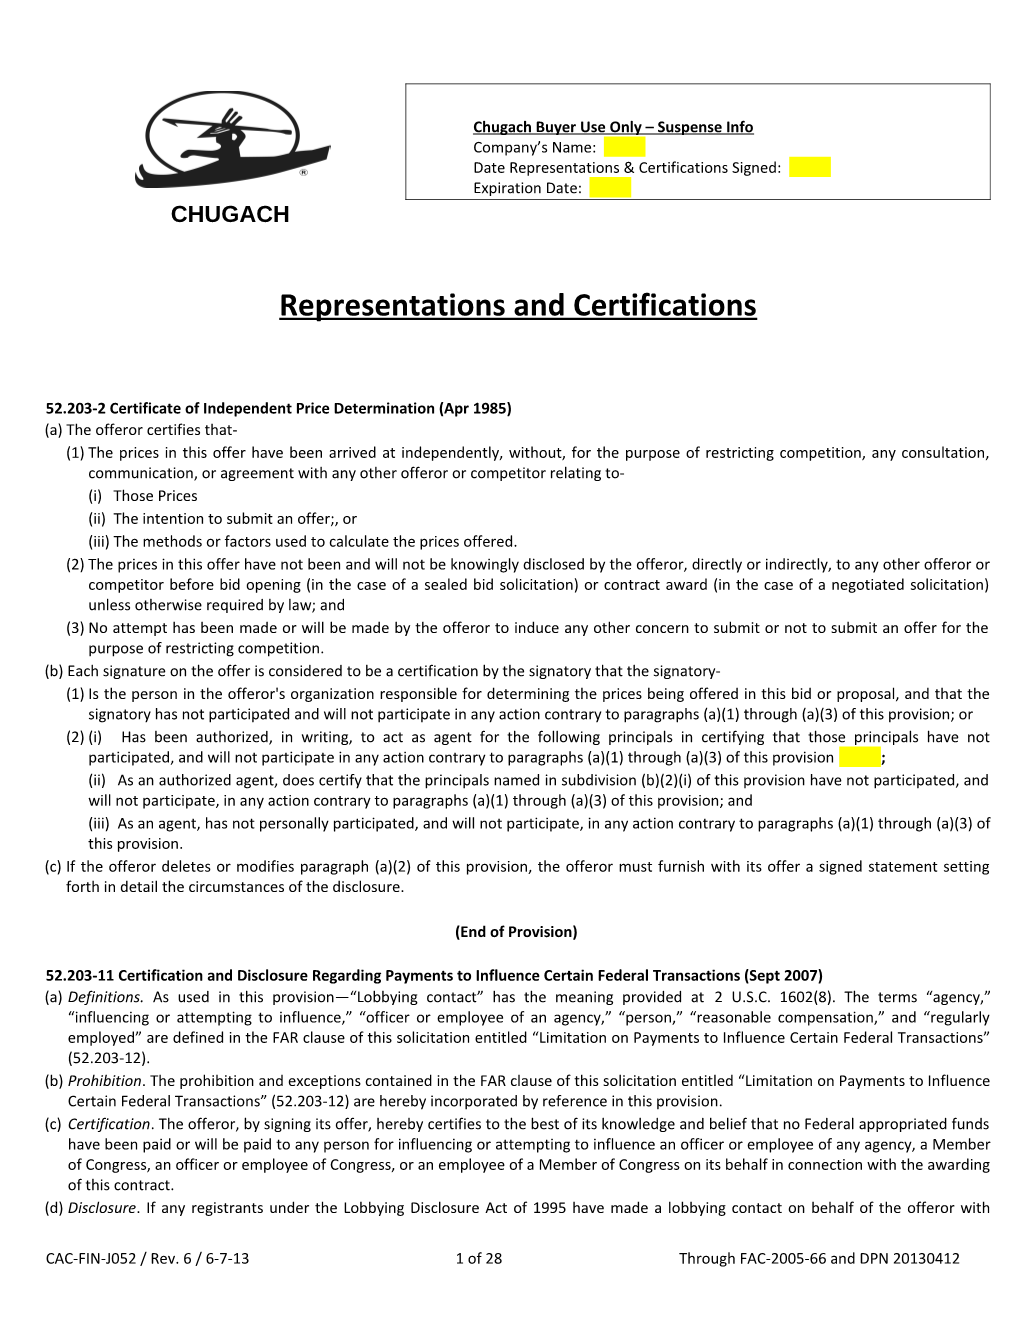 Date Representations & Certifications Signed